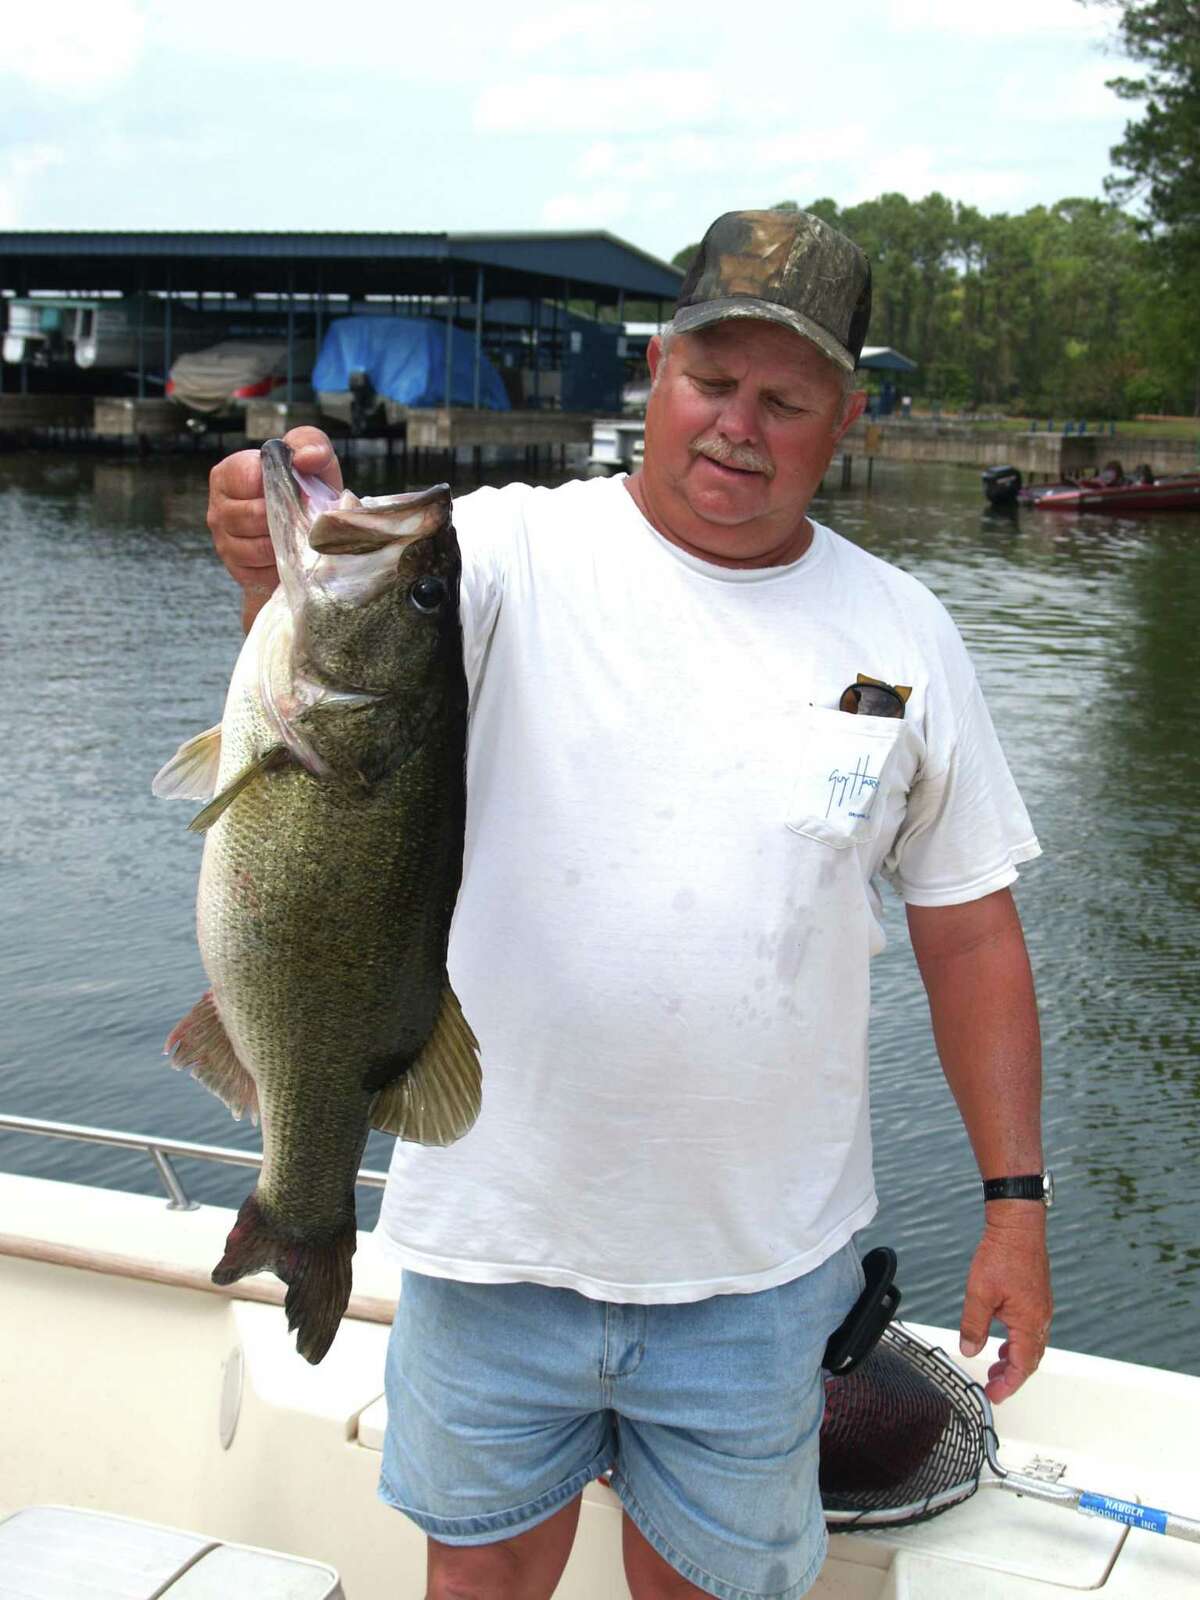 This nine-pound plus bass was caught by fishing guide Butch Terpe sight fishing during the spawn.